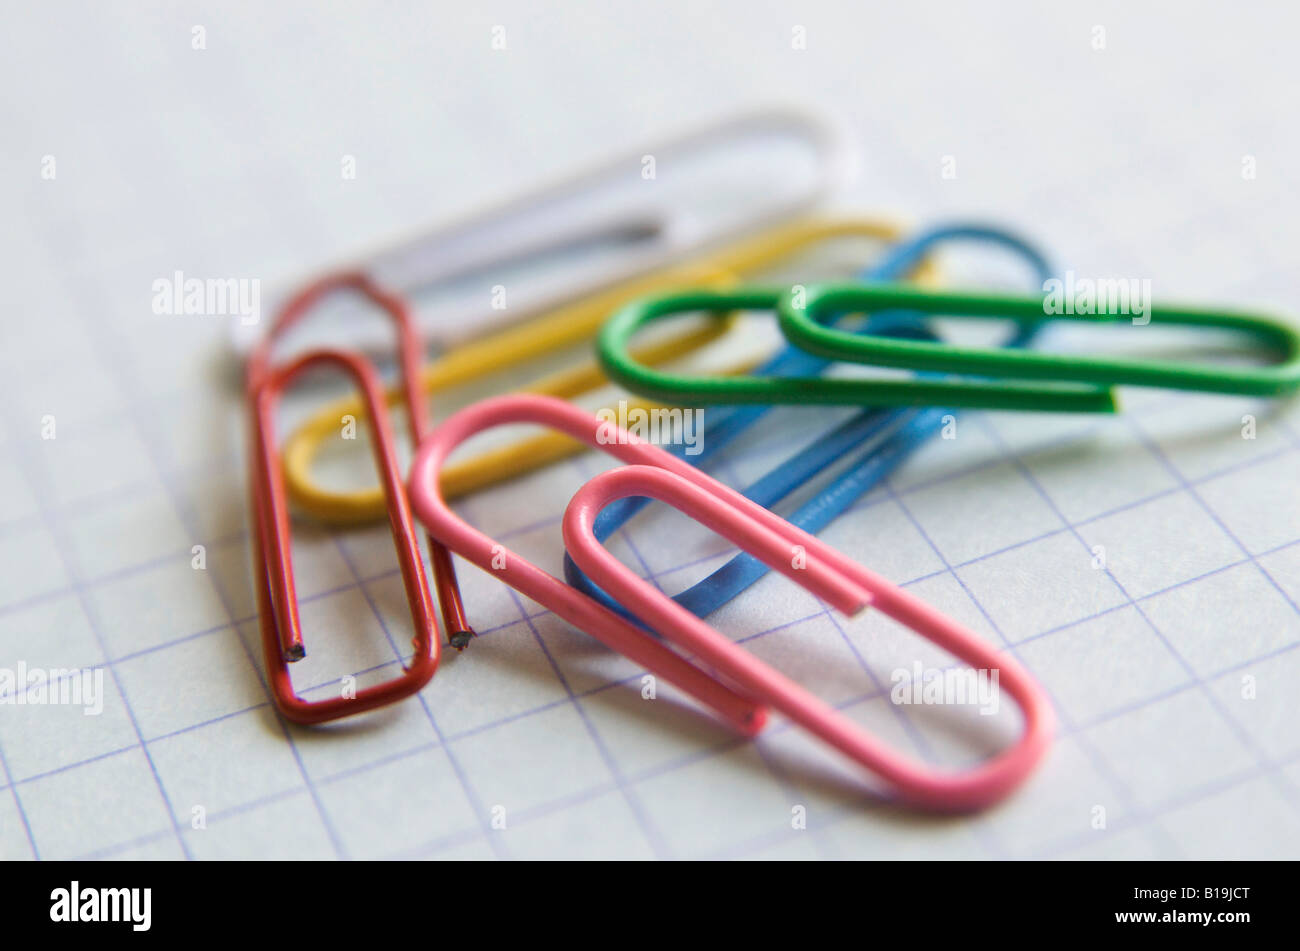 Paper clips on office paper background Stock Photo